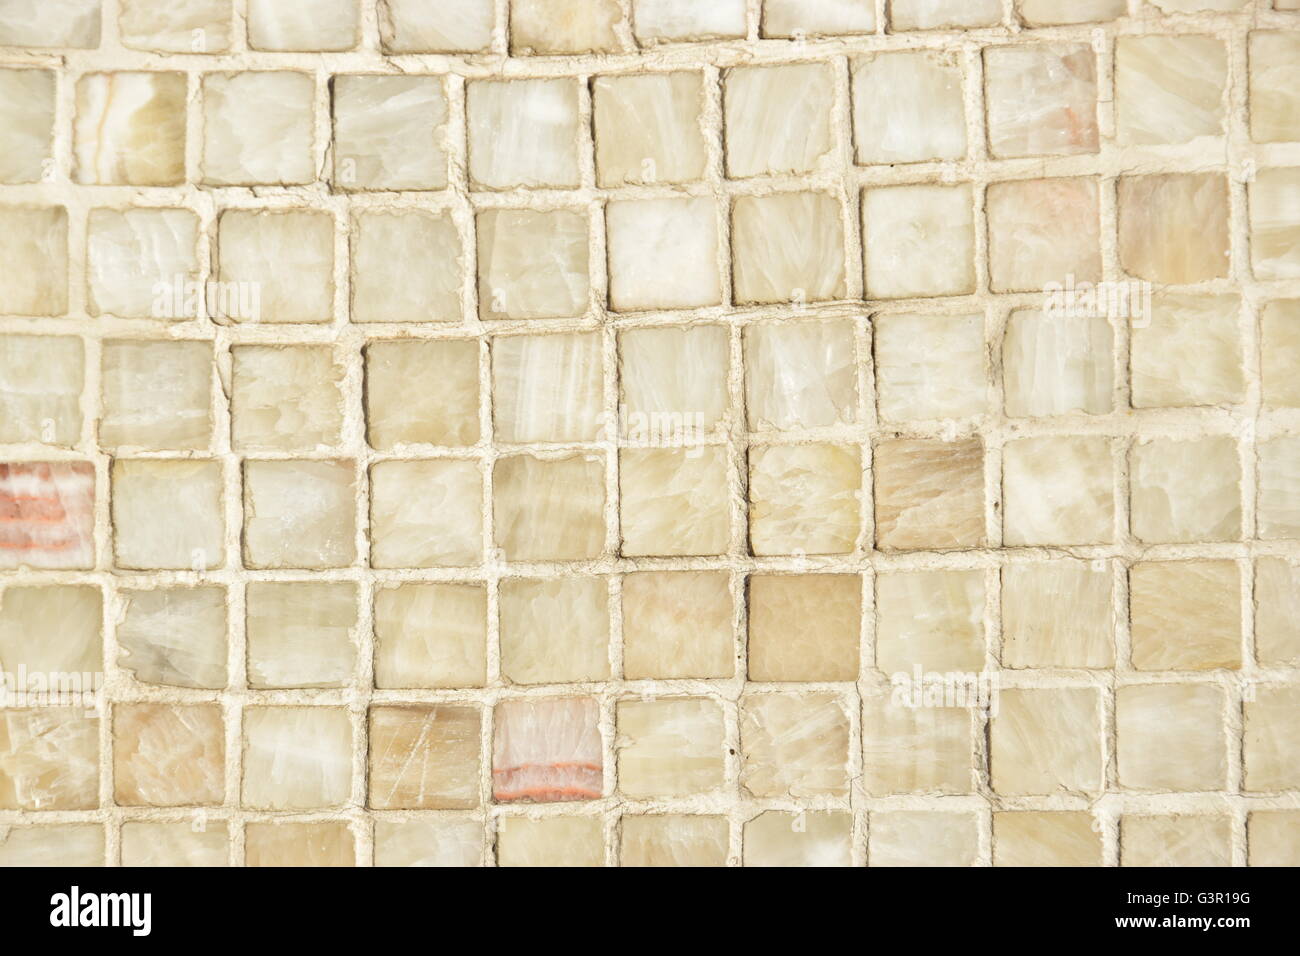 Background of tiles Stock Photo